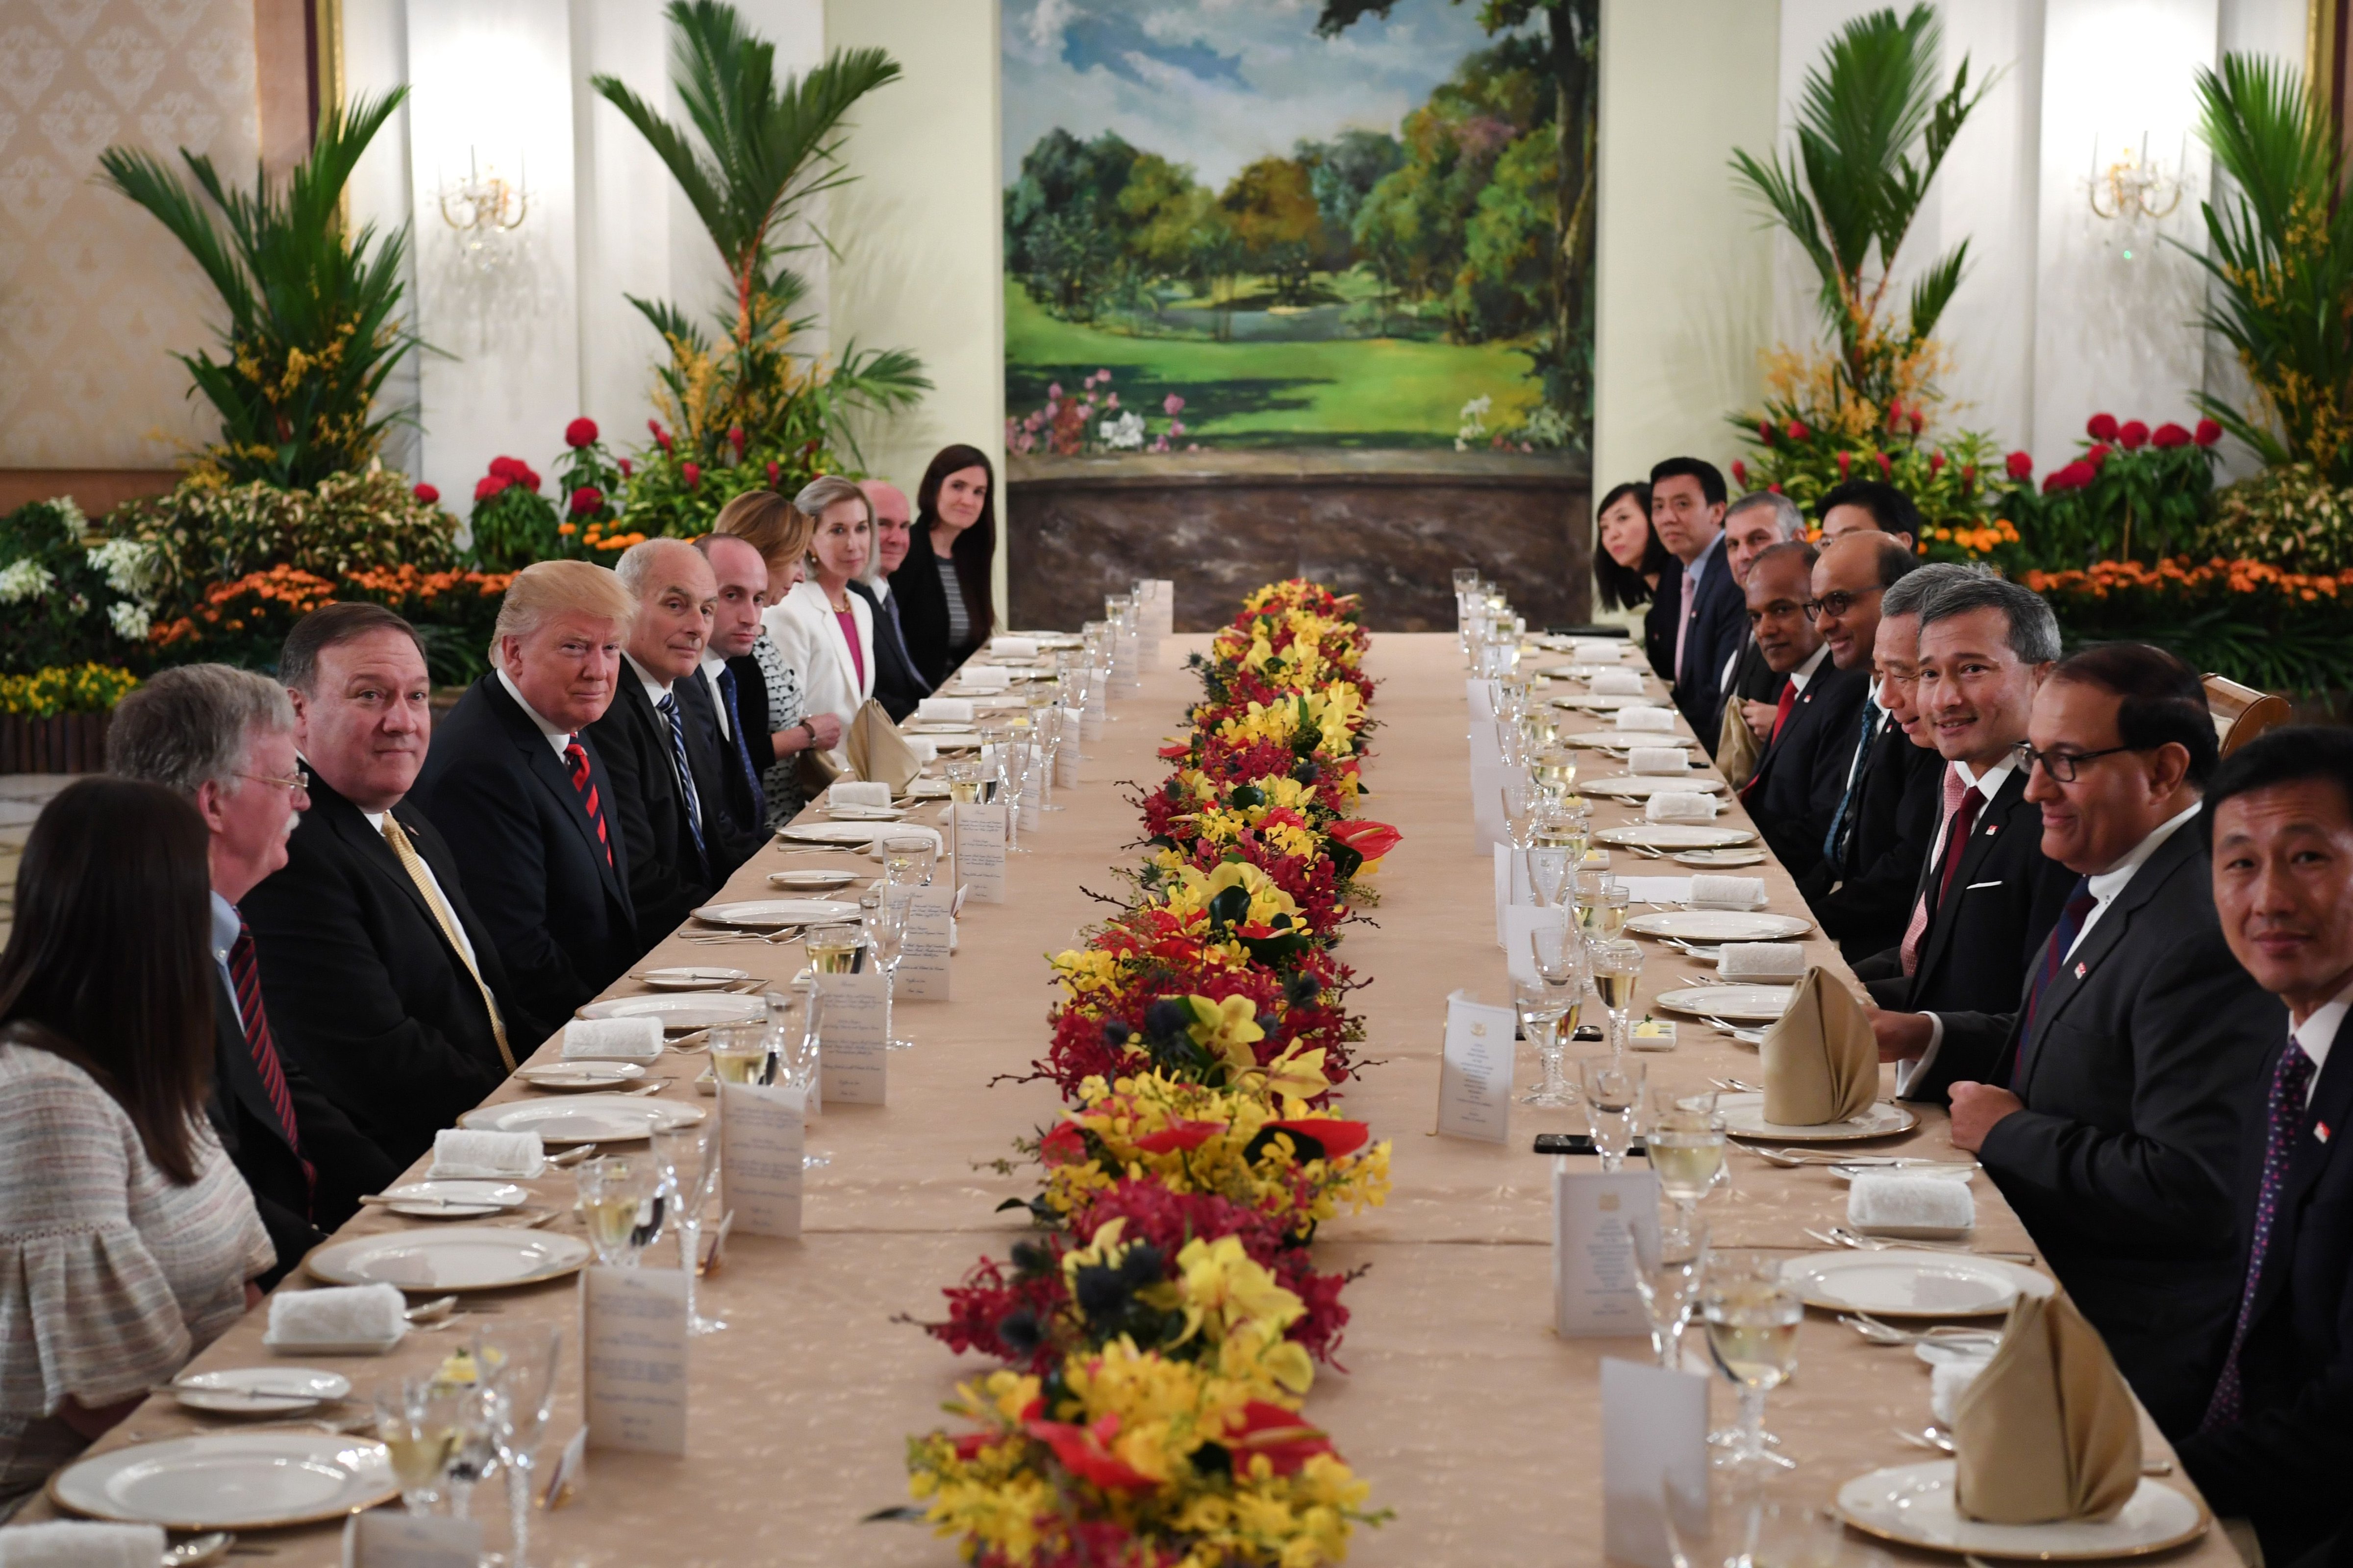 President Donald Trump and his delegation share a working lunch Singapore's Prime Minister Lee Hsien Loong (4th R) and his team during the U.S. leader's visit to Singapore on June 11, 2018. (Saul Loeb—AFP/Getty Images)